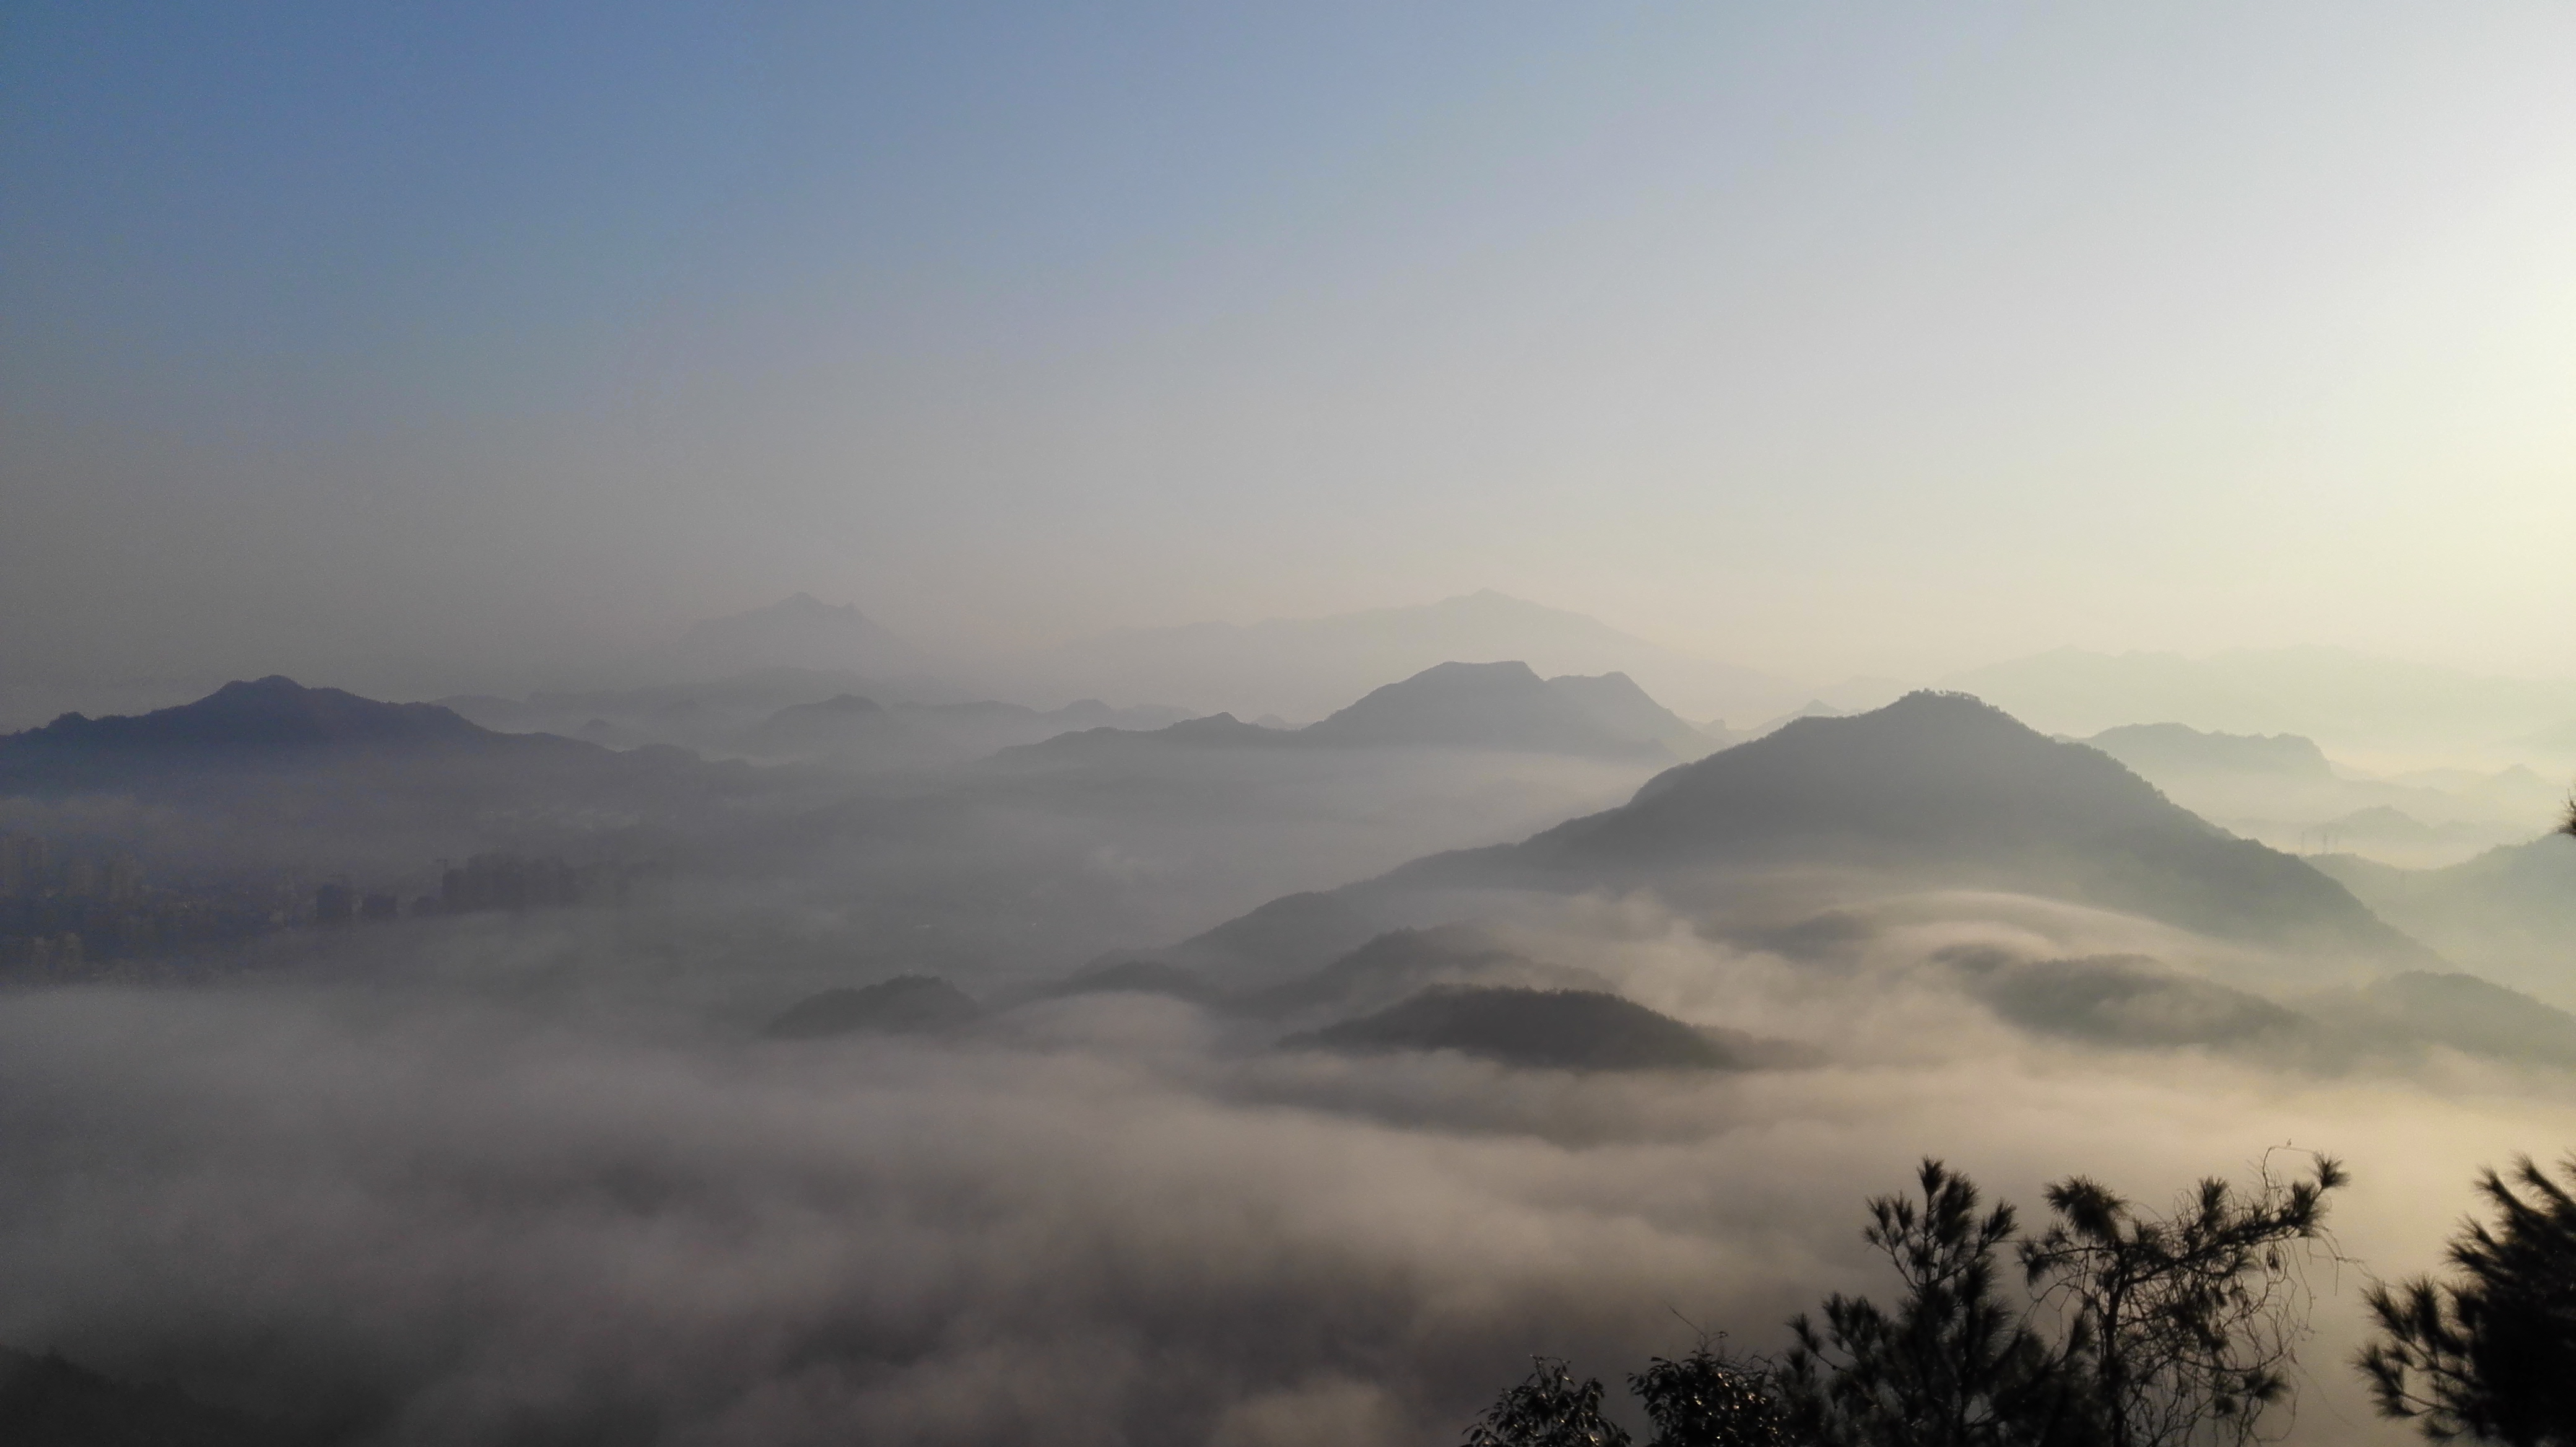 View of a Chinese mountain range